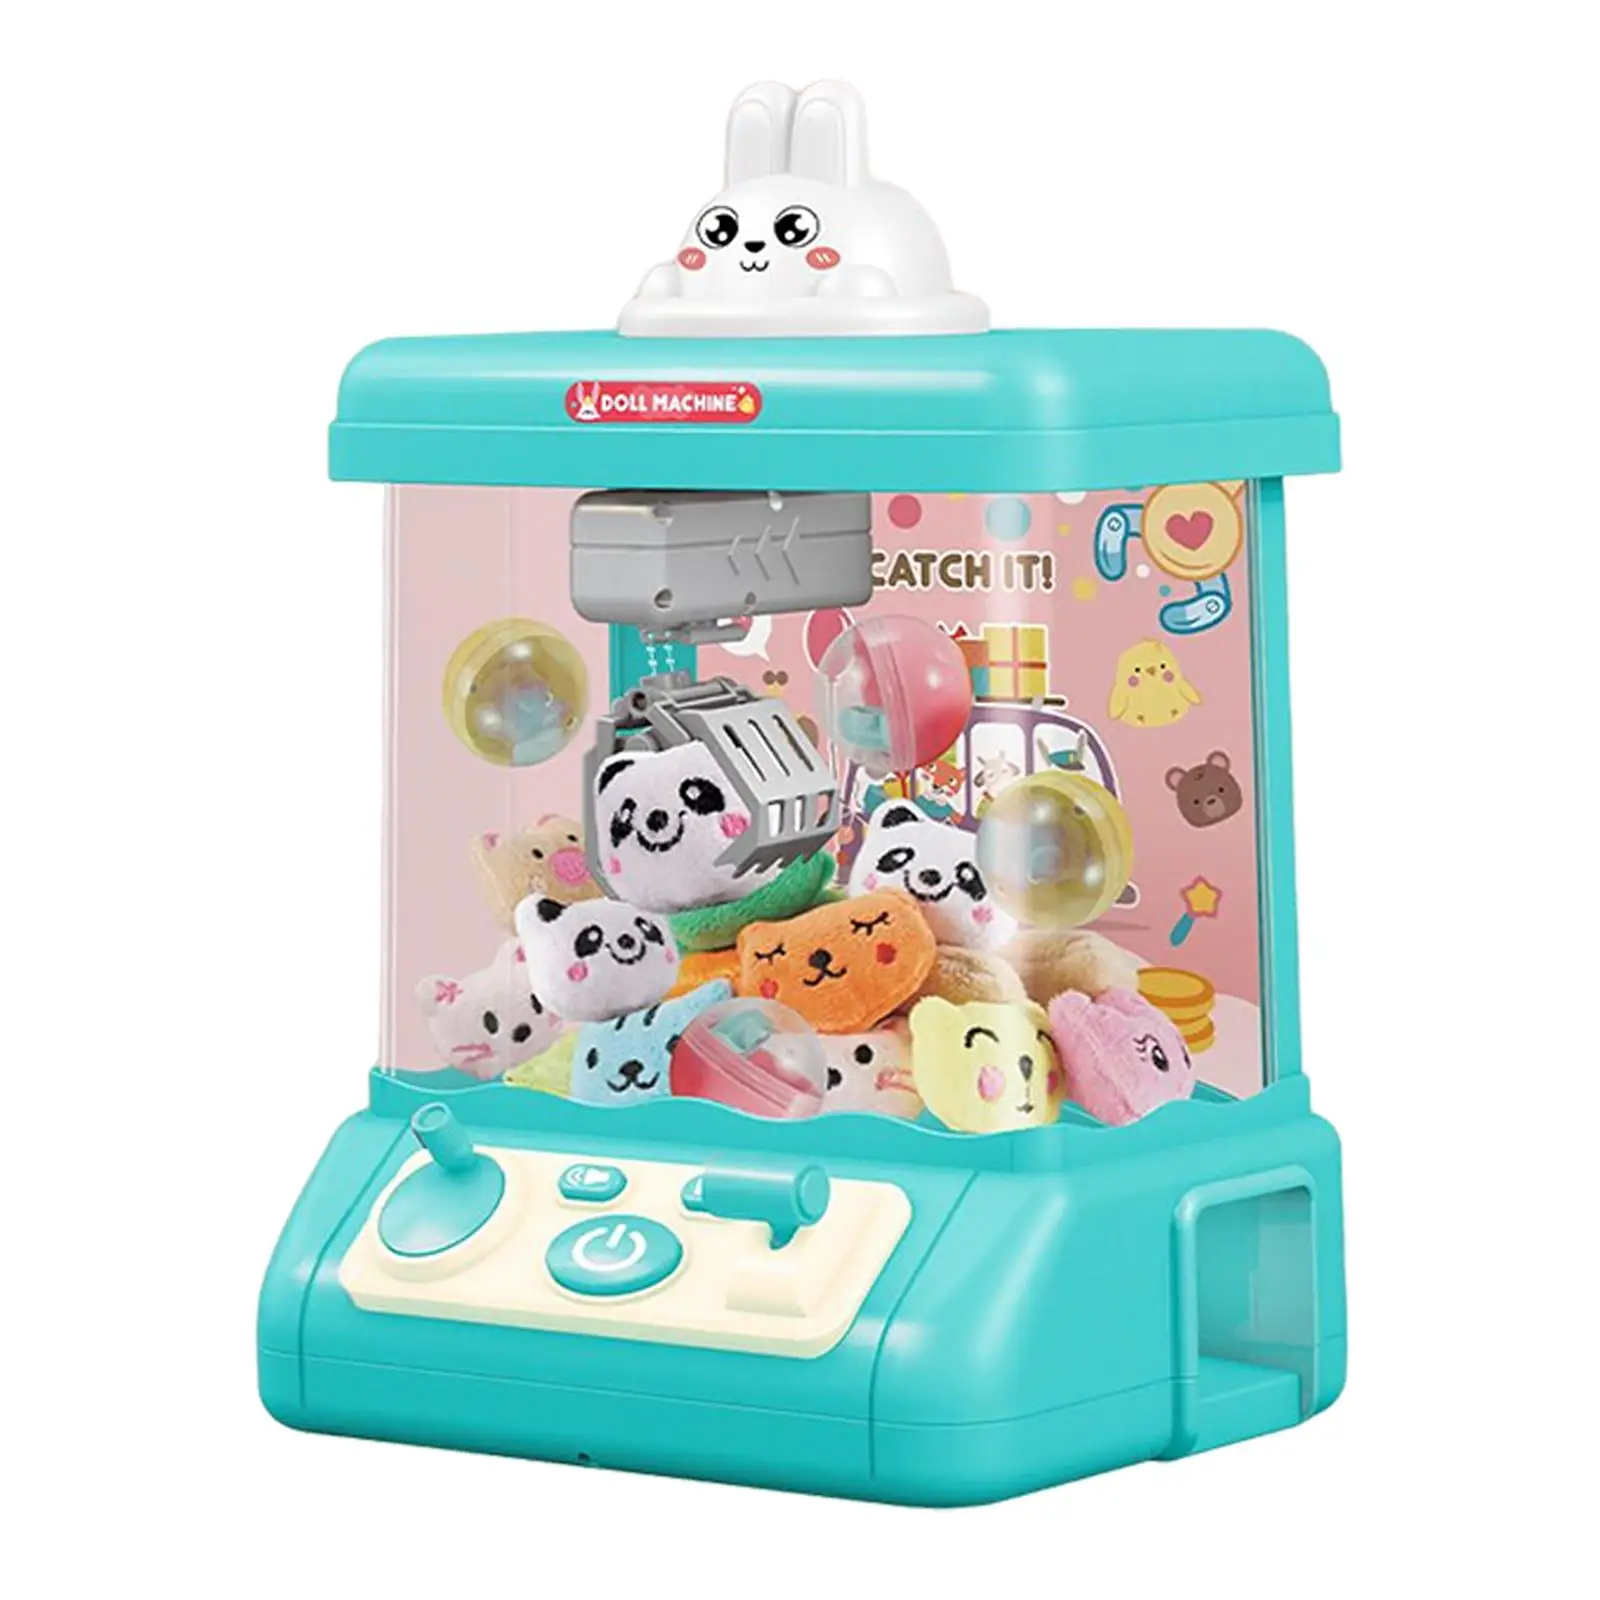 Household Claw Machine with Music and Lighting Gift Electronic Arcade Game Doll Machine DIY Catching Doll Machine for Children